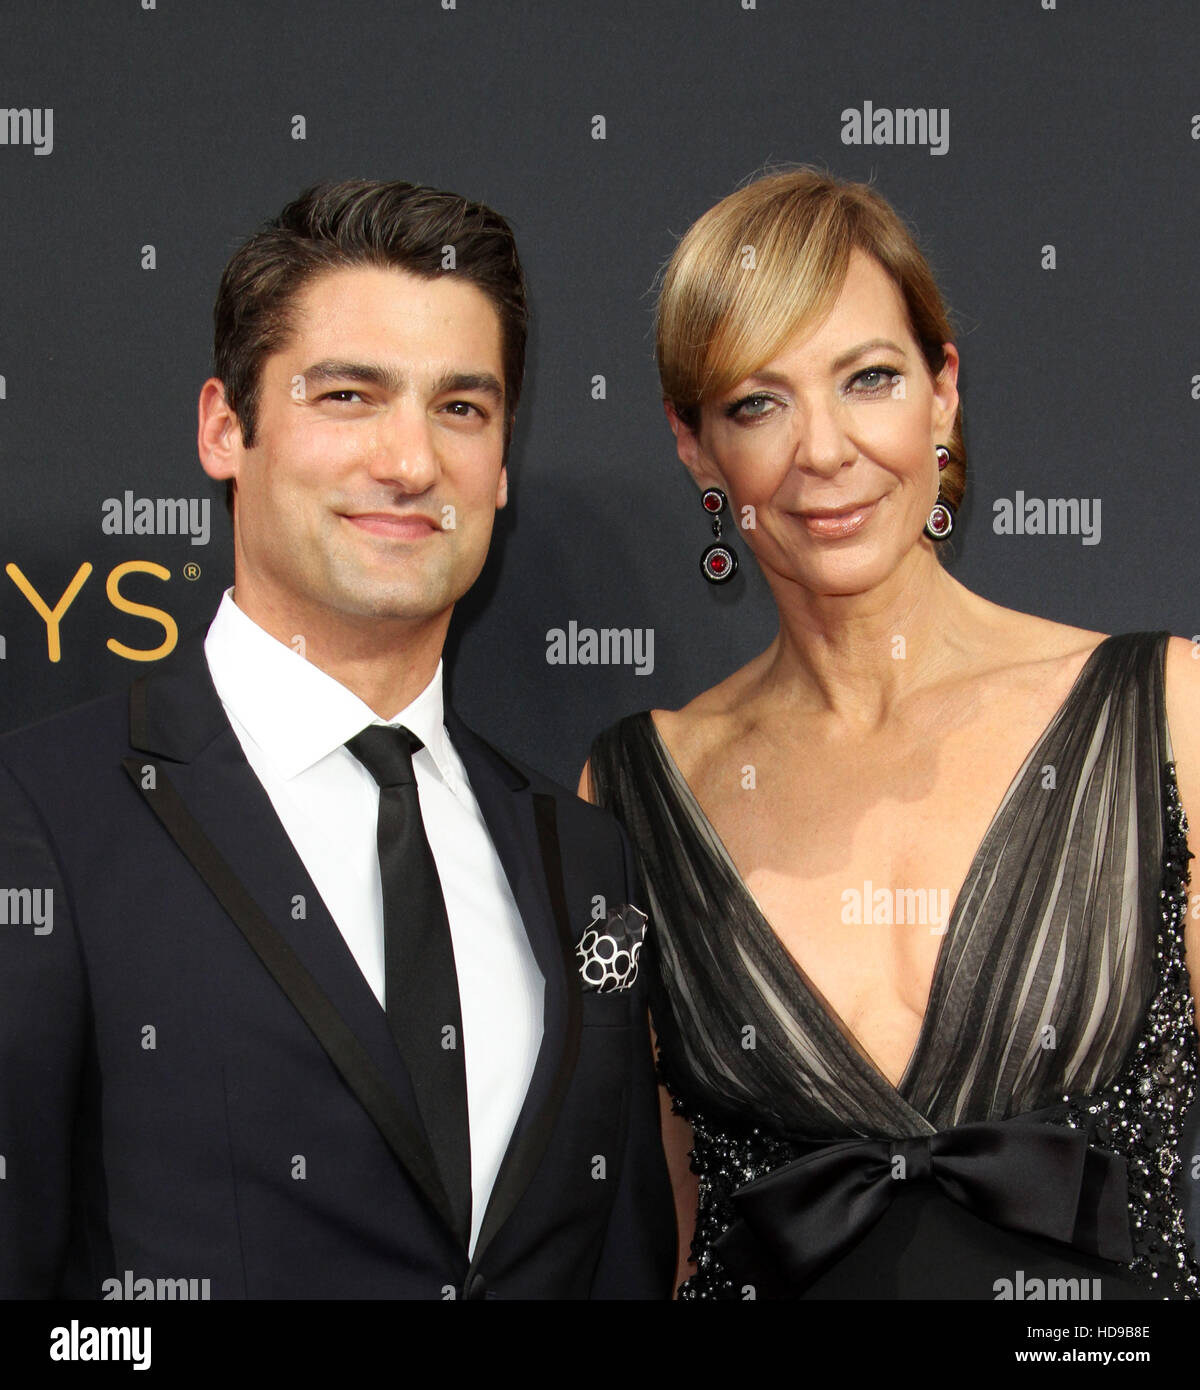 68th Emmy Awards Arrivals 2016 held at the Microsoft Theater  Featuring: Allison Janney, Philip Joncas Where: Los Angeles, California, United States When: 18 Sep 2016 Stock Photo